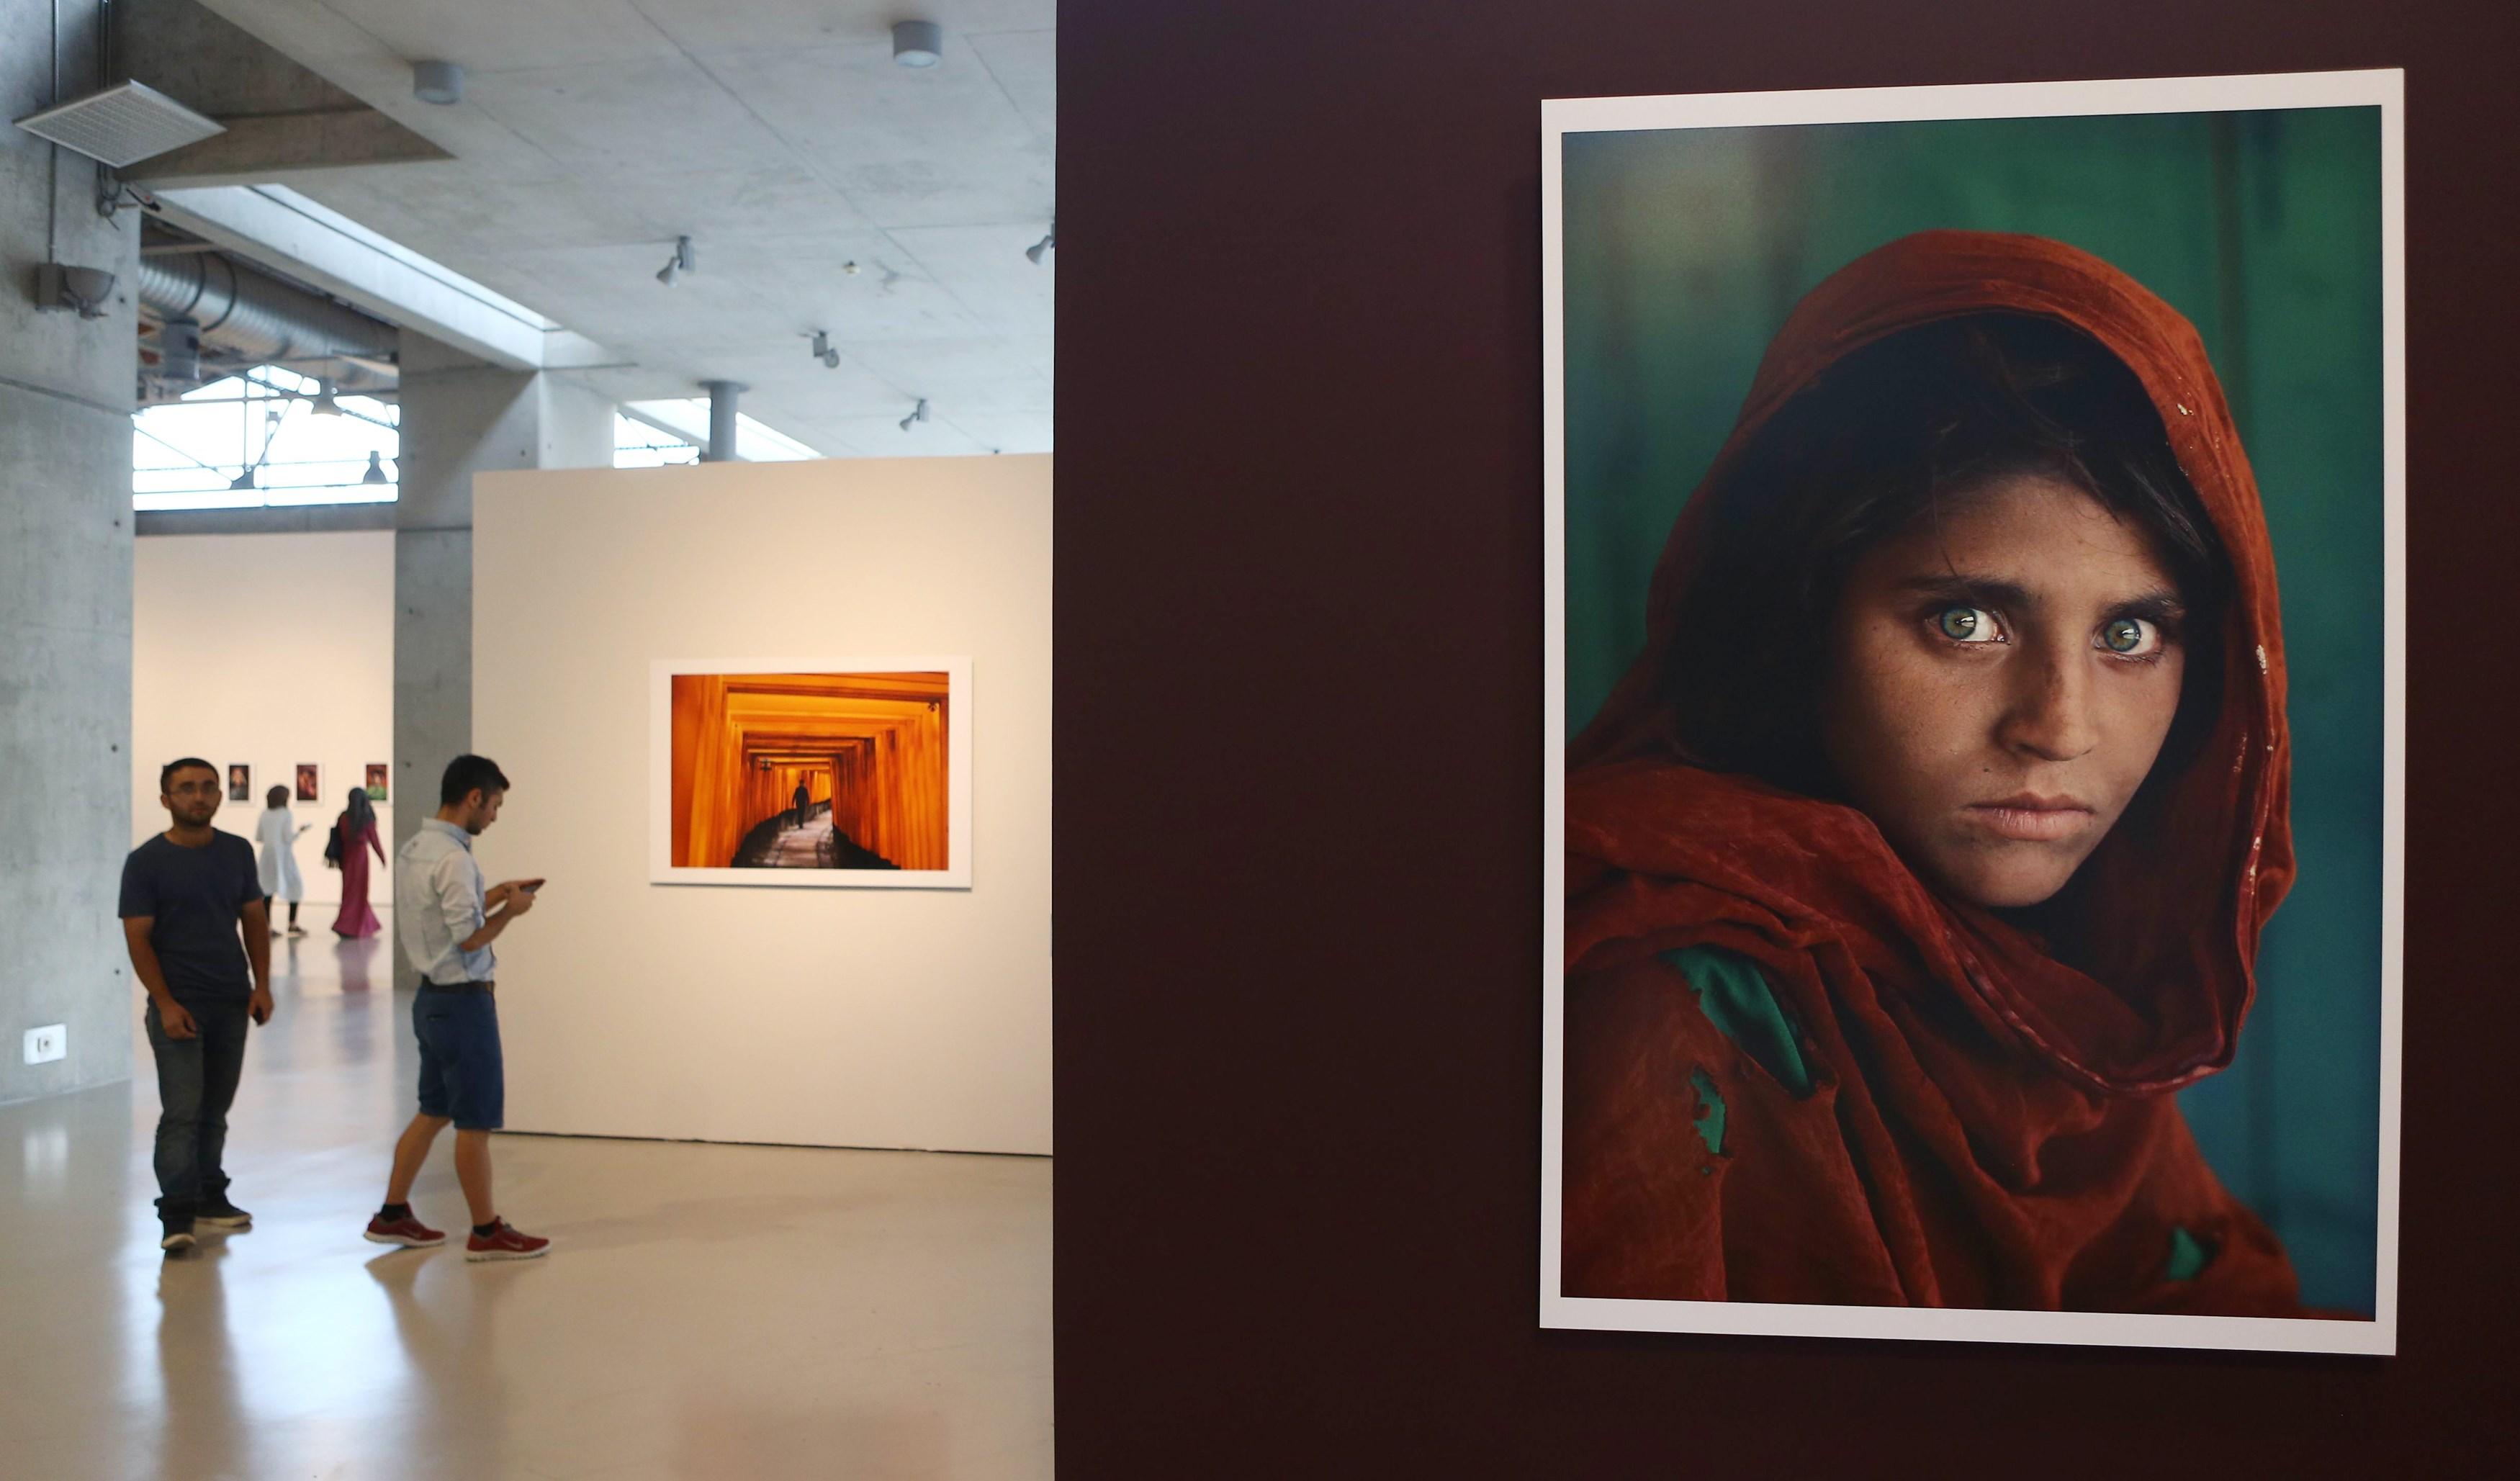 Report Afghan Girl From Iconic National Geographic Photo Freed On Bail Cbs News 